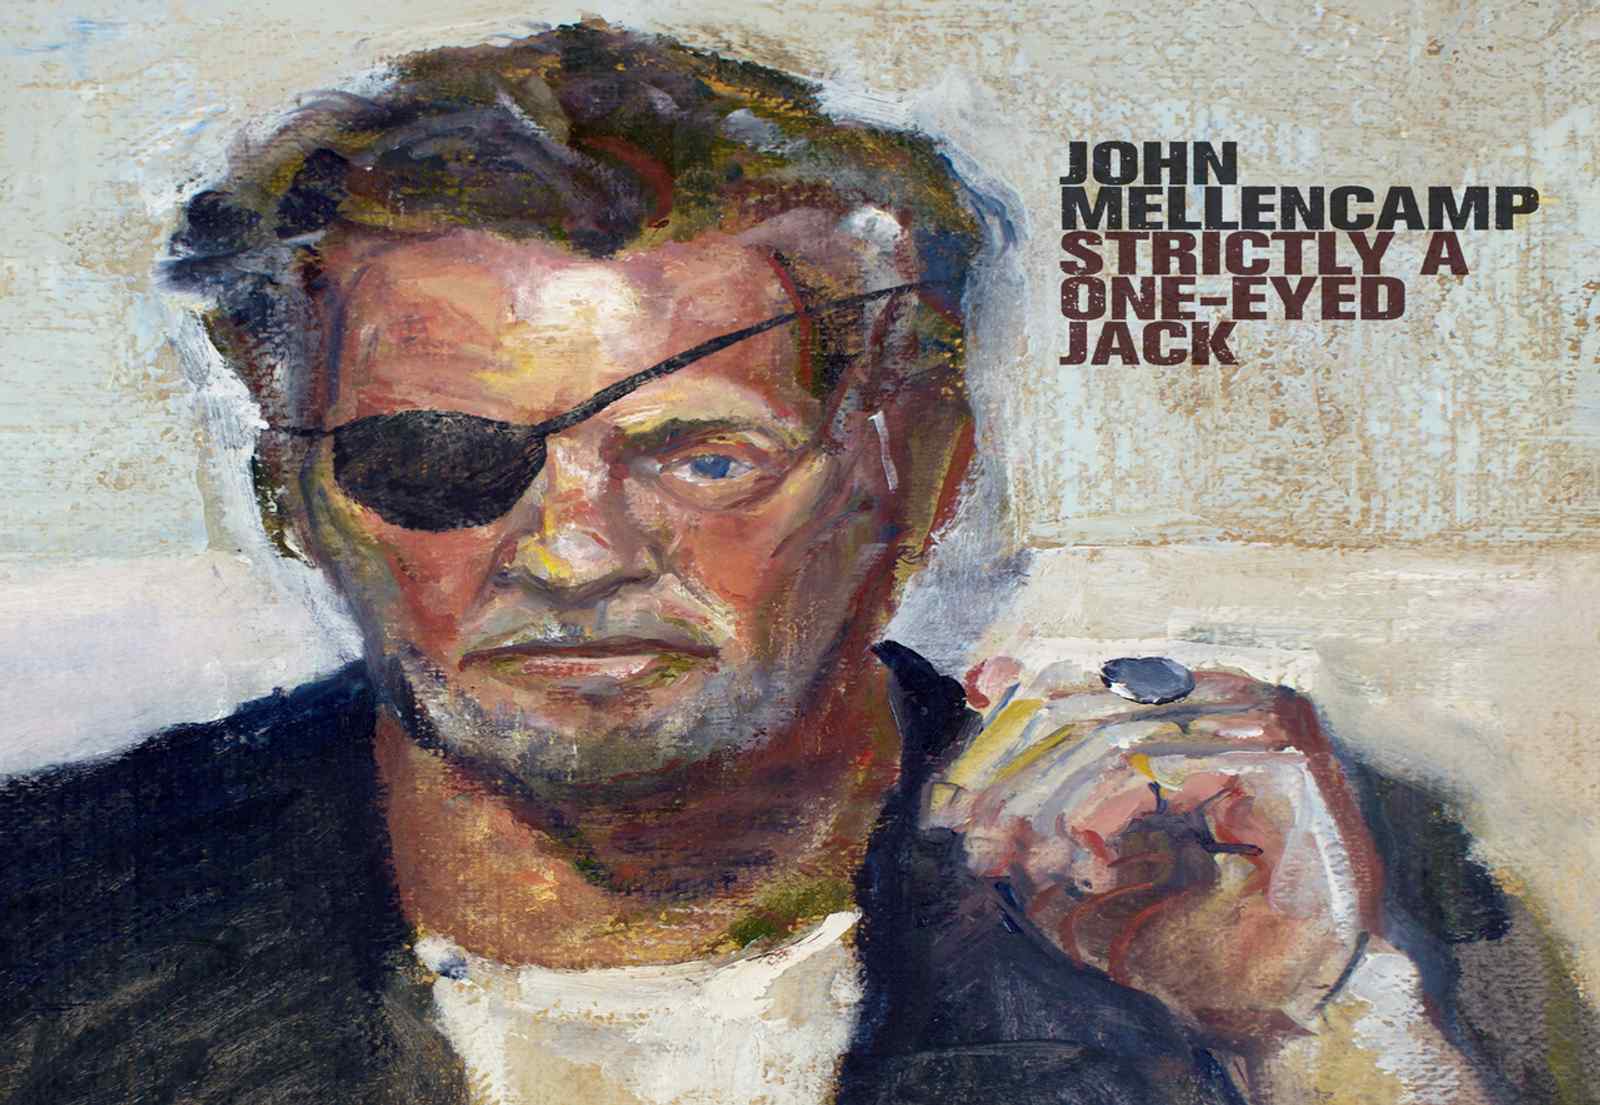 John Mellencamp's Highly Anticipated New Album Strictly A One-Eyed Jack Out Now On Republic Records 